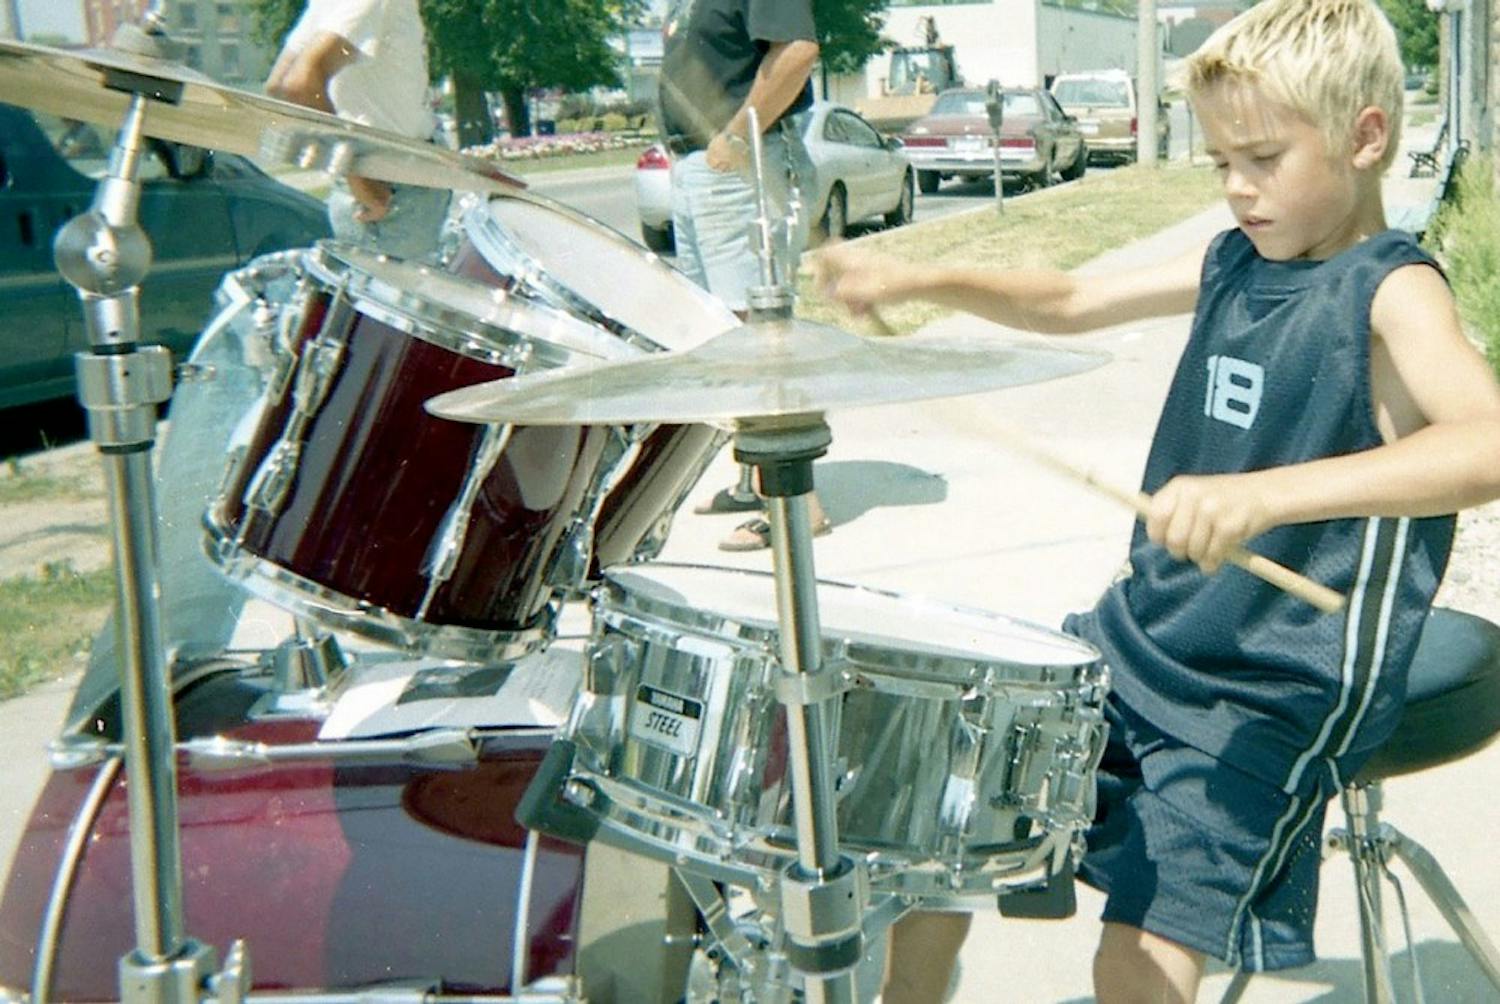 Justin Bieber’s hometown is honoring him at the Stratford Perth Museum in Steps to Stardom, an exhibit which highlights Bieber’s journey to fame. Bieber was a regular street performer in Stratford, Ontario, as shown above playing drums in 2002.